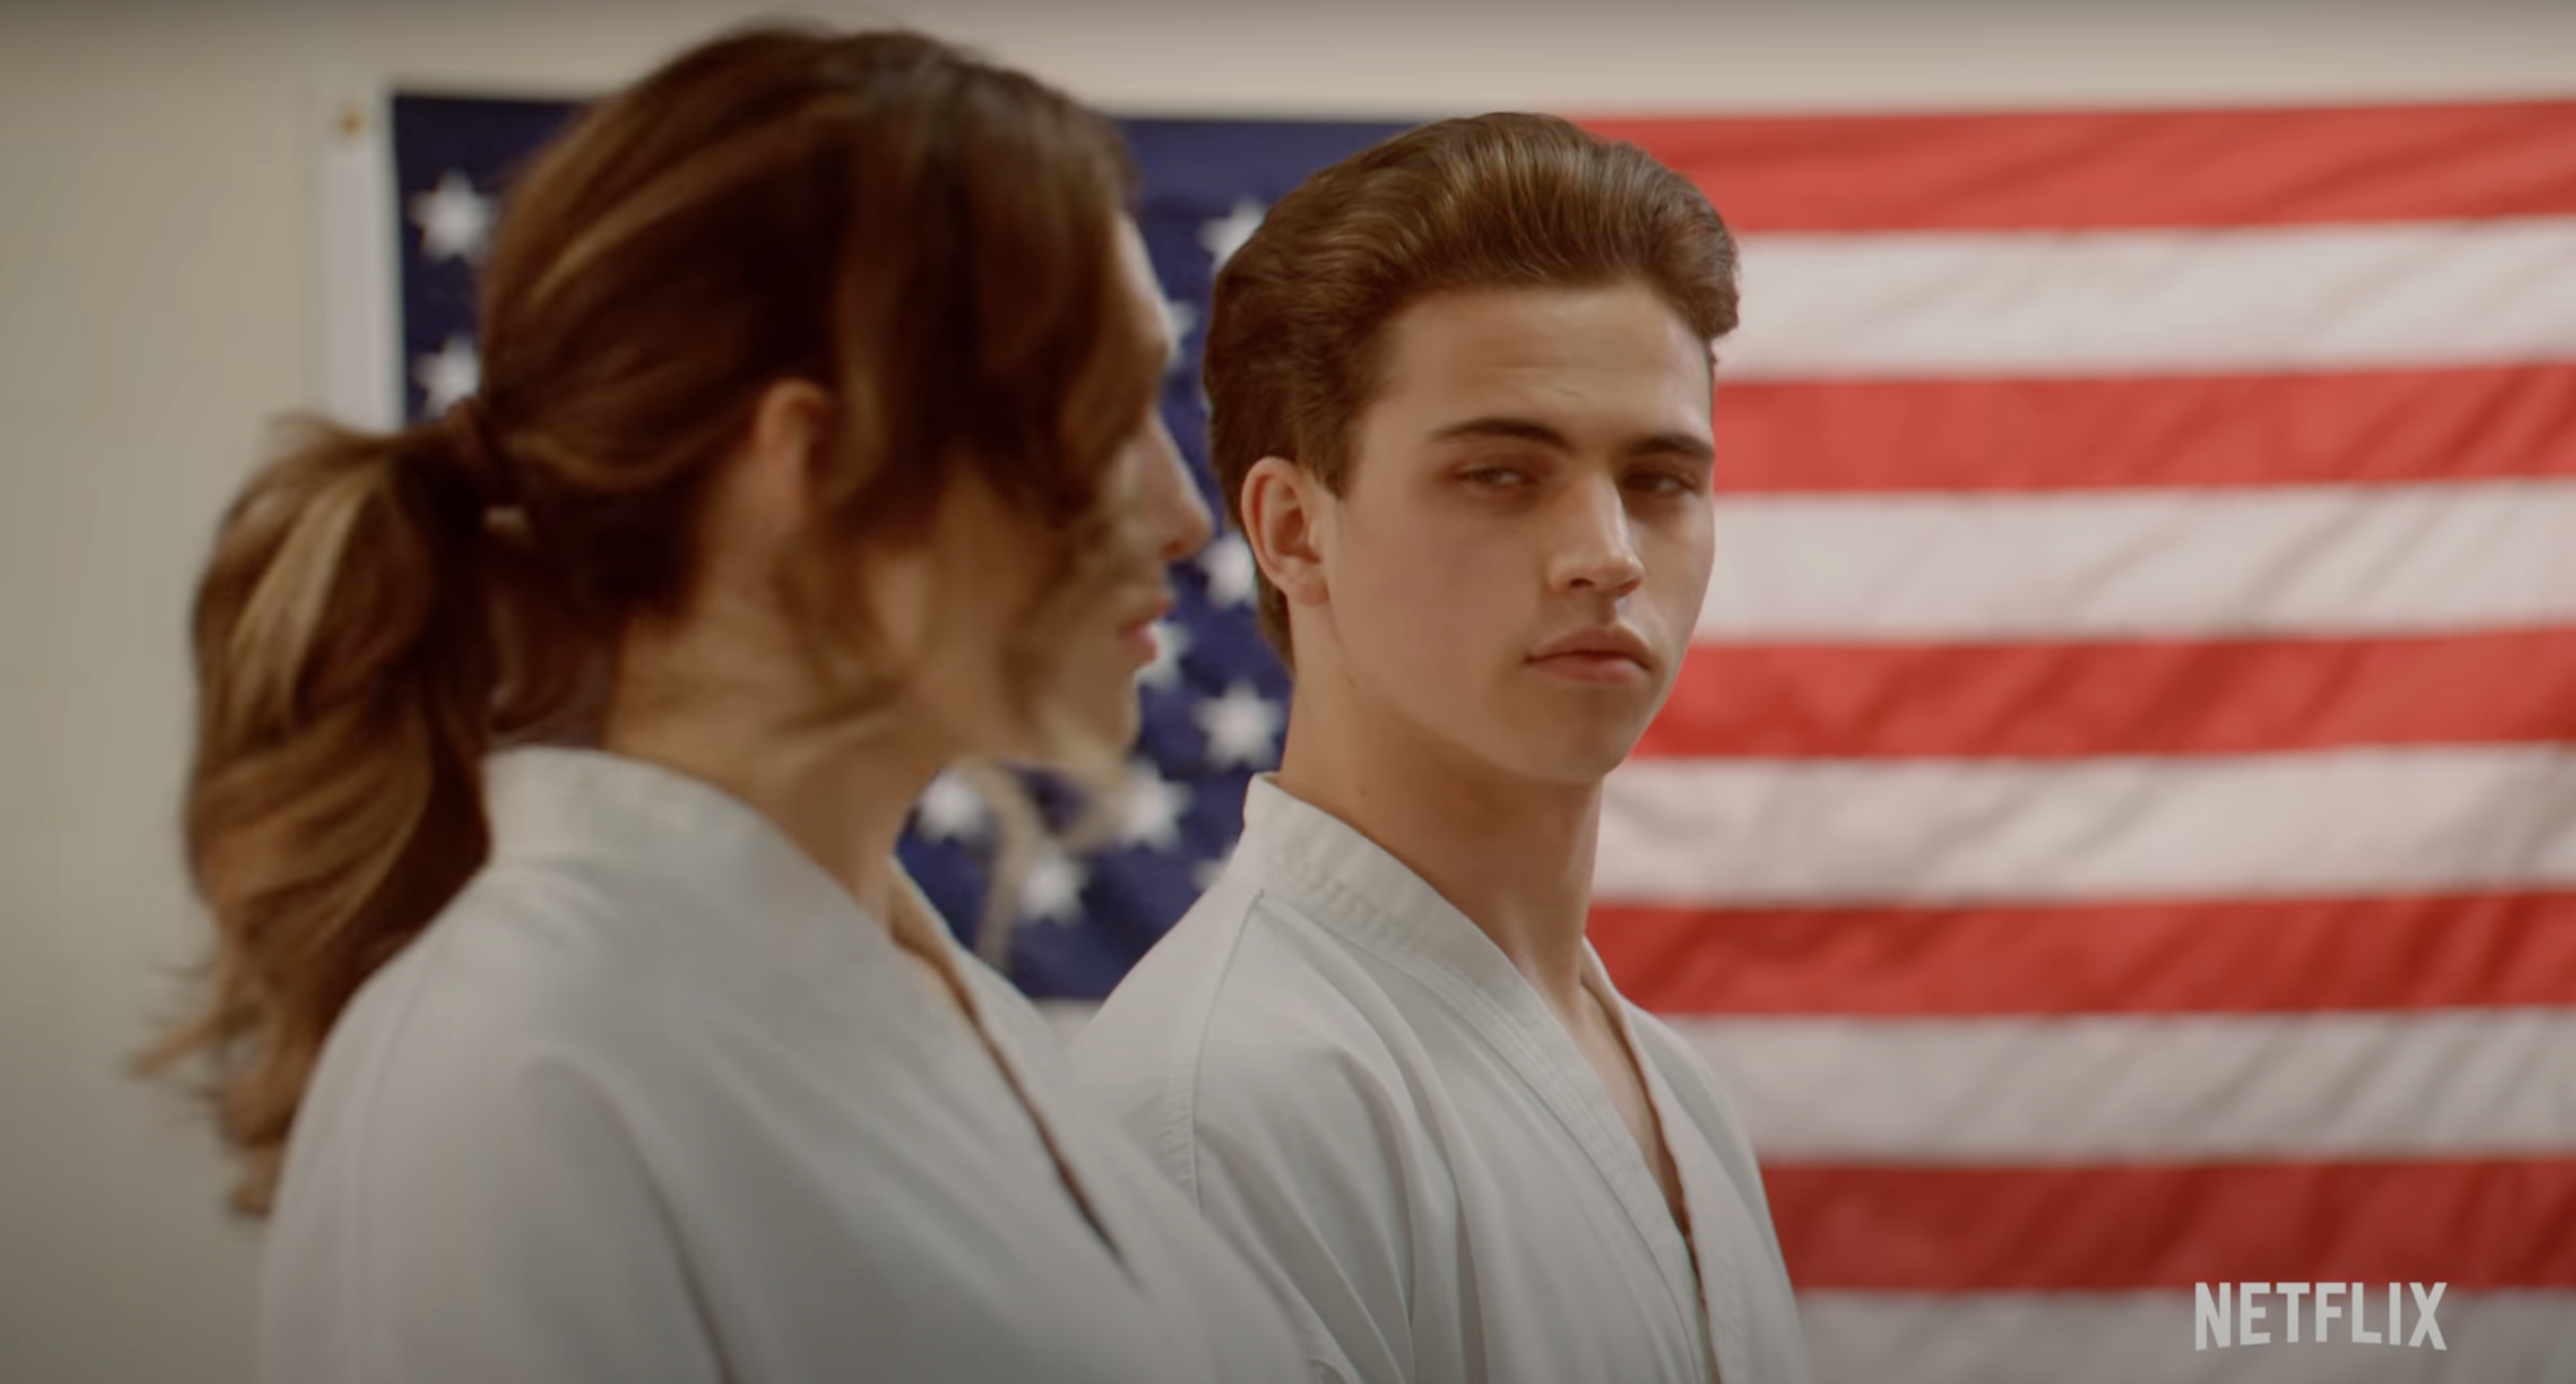 Cobra Kai' Season 4 Delivers Dark Thrills, And Maybe an Ending